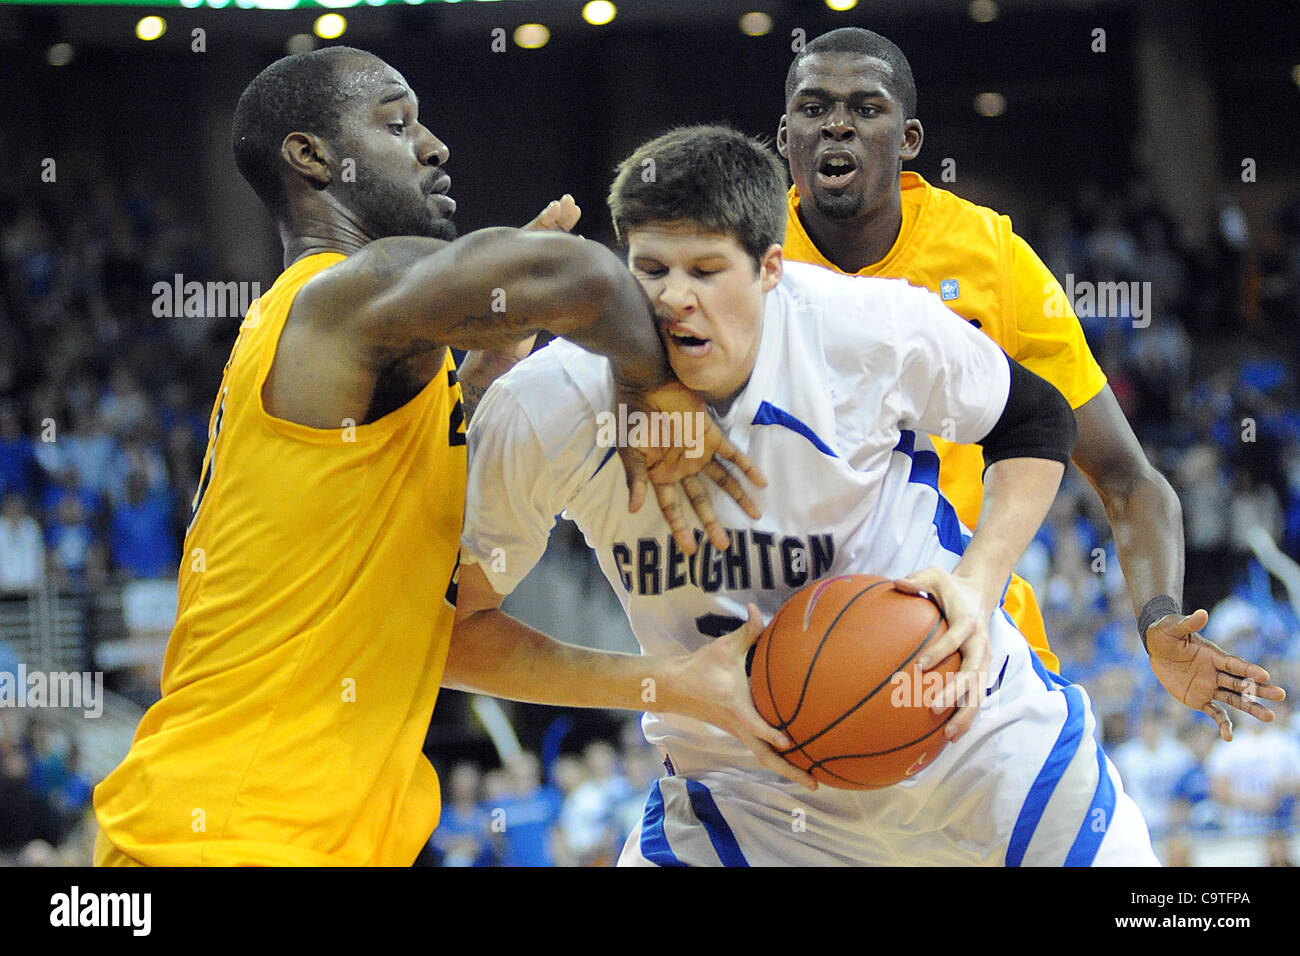 Feb. 18, 2012 - Omaha, Nebraska, U.S - Creighton forward Doug McDermott (3) takes an elbow from Long Beach State forward TJ Robinson (20) as Long Beach State guard Larry Anderson (21)looks on. Creighton defeated Long Beach State 81-79 in a BracketBuster game played at the CenturyLink Center in Omaha Stock Photo